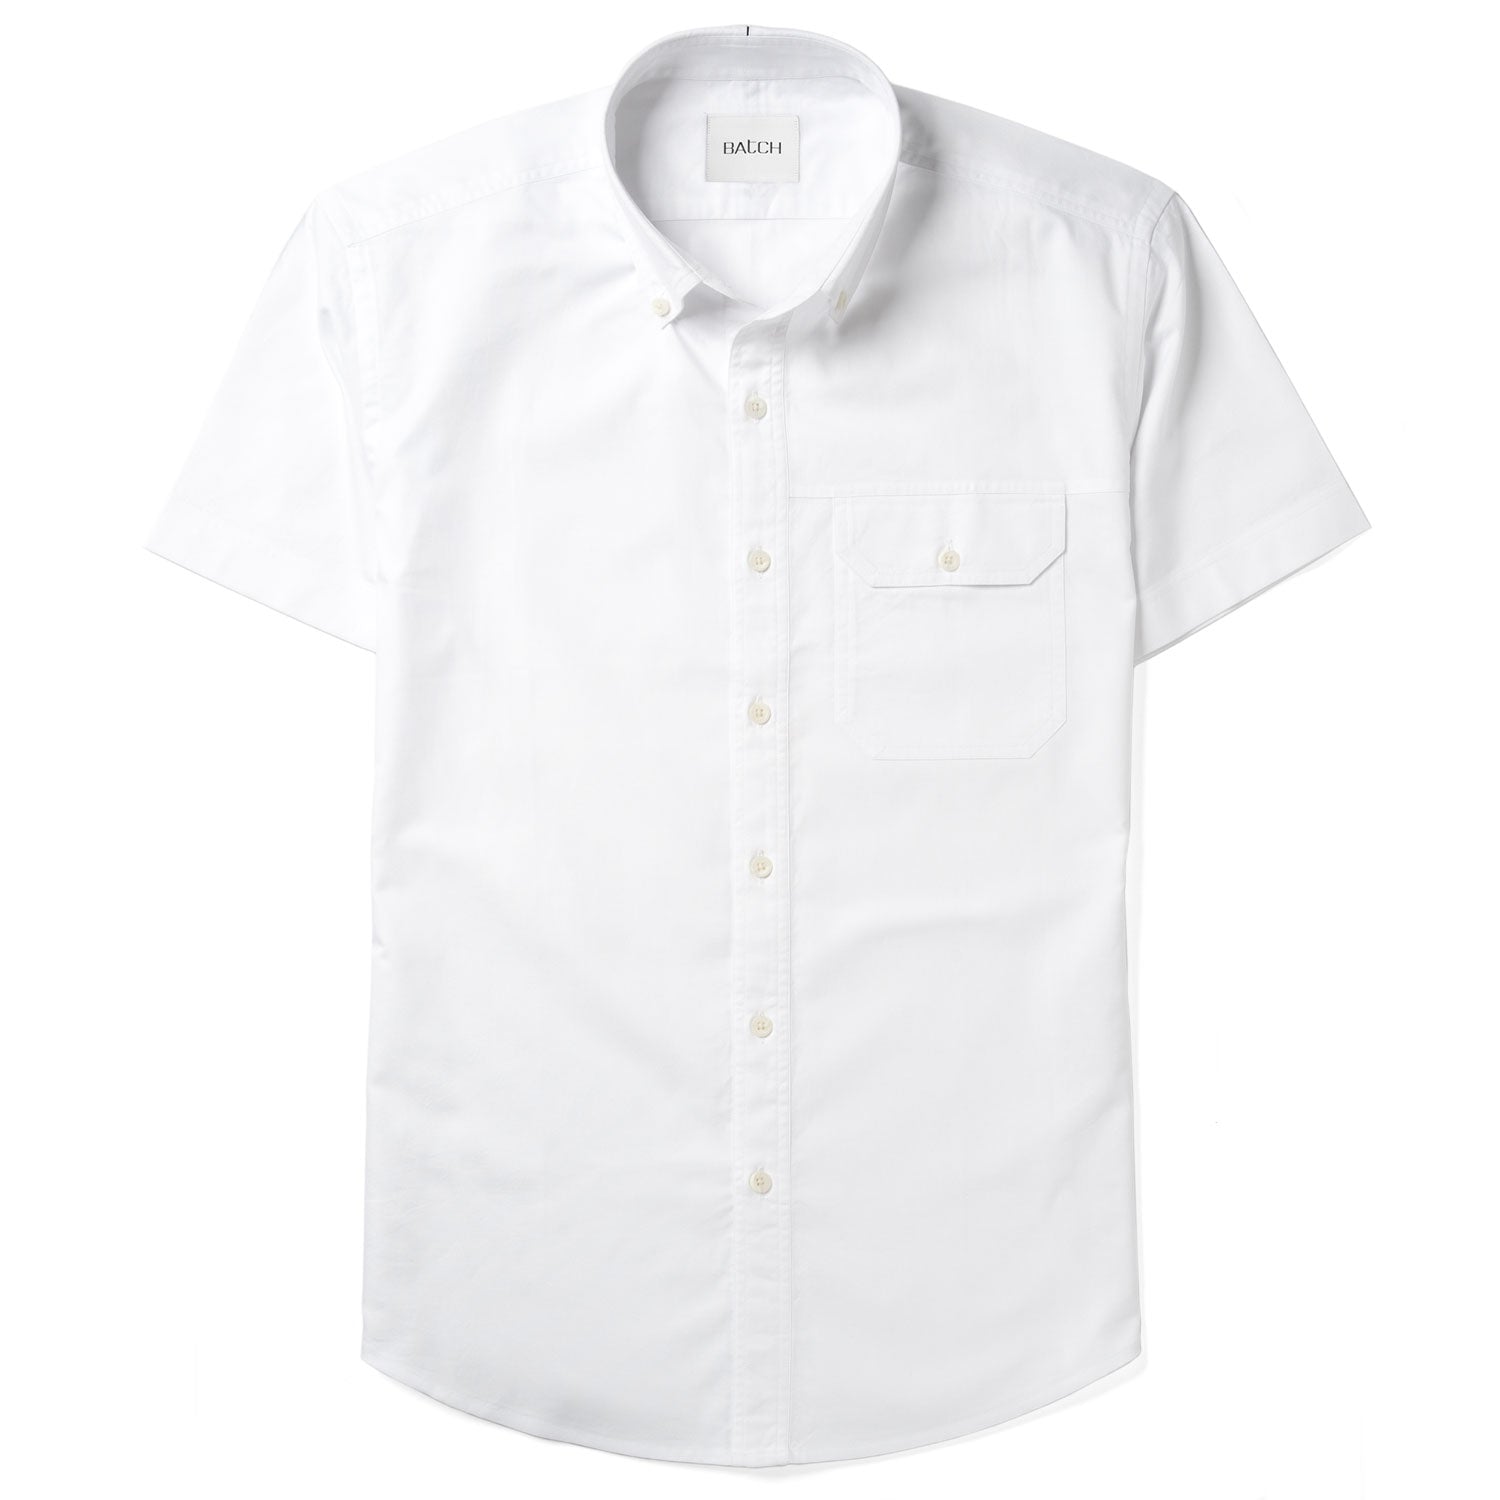 Builder Short Sleeve Casual Shirt – Pure White Cotton Oxford